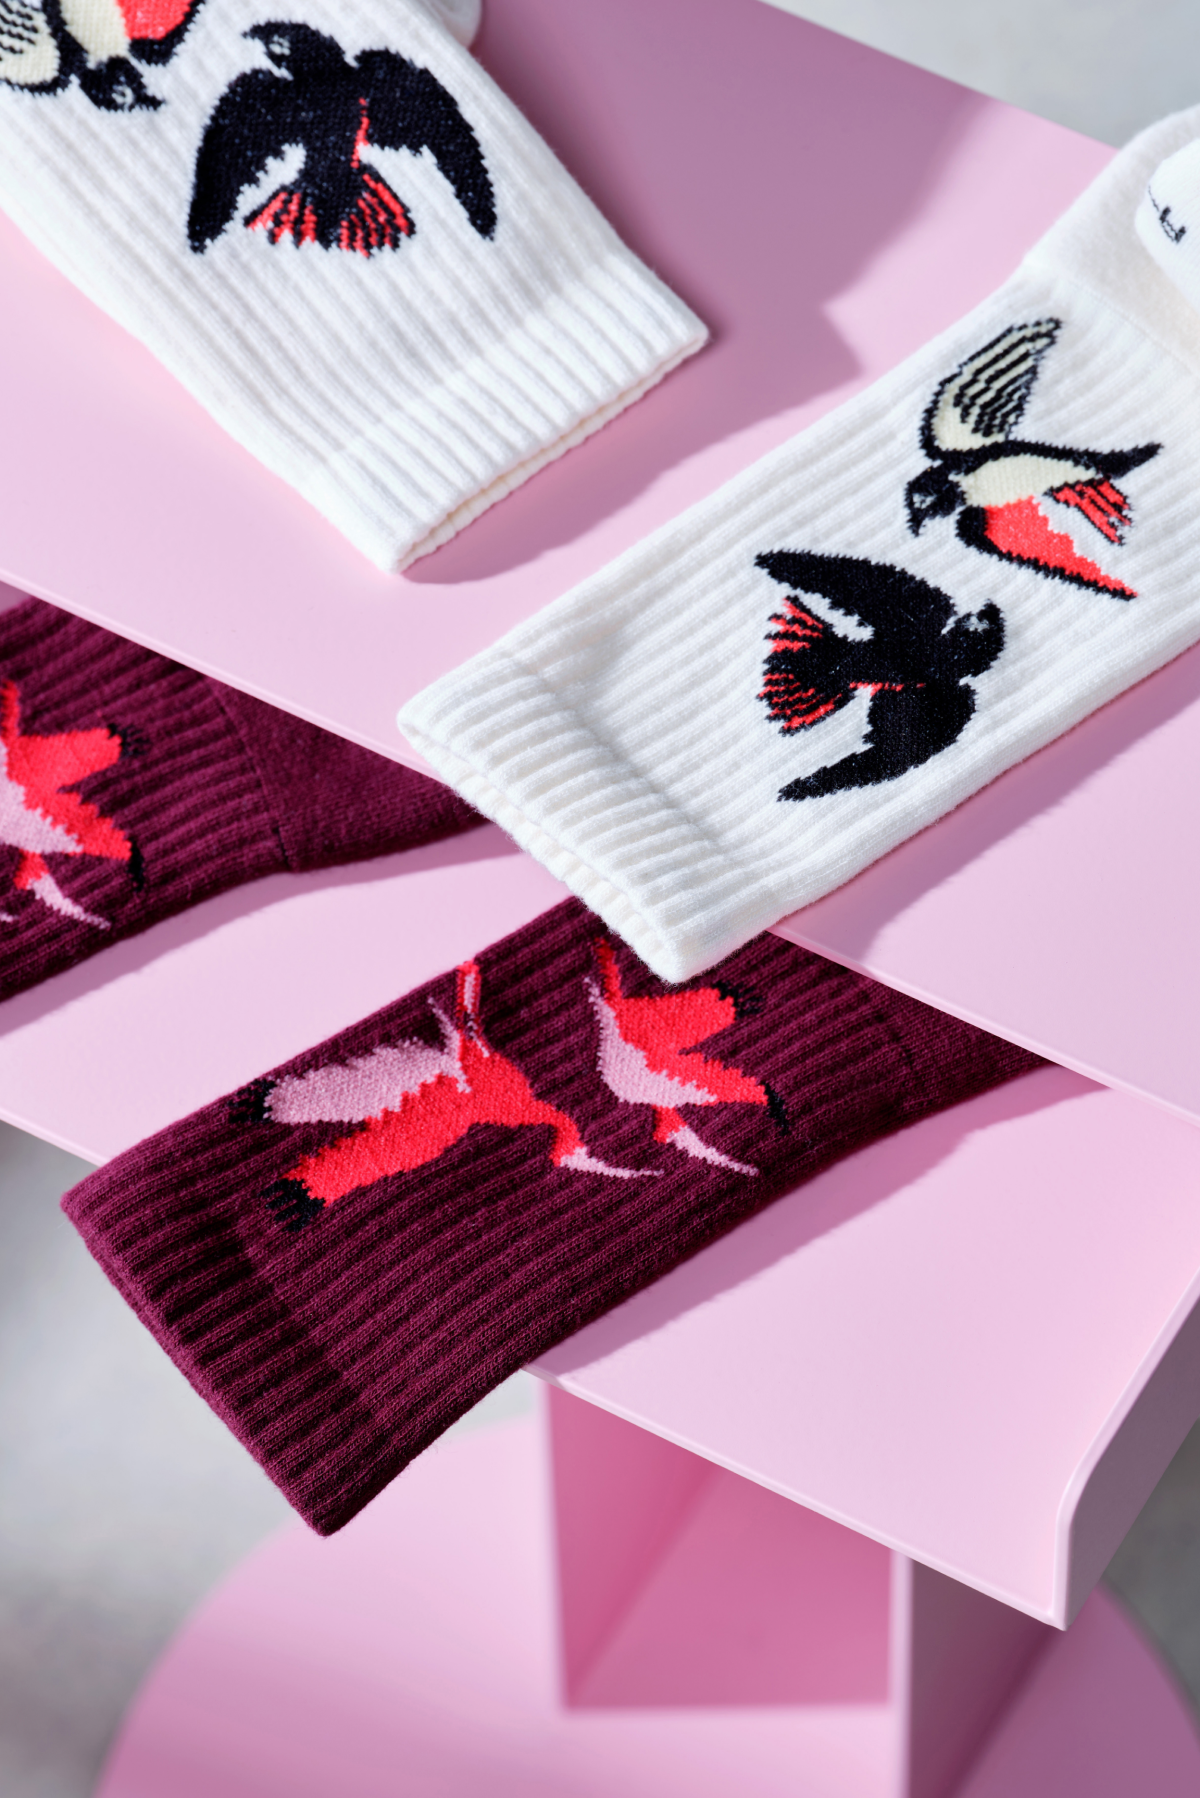 A-dam red crew socks with red bird embroidery from organic cotton